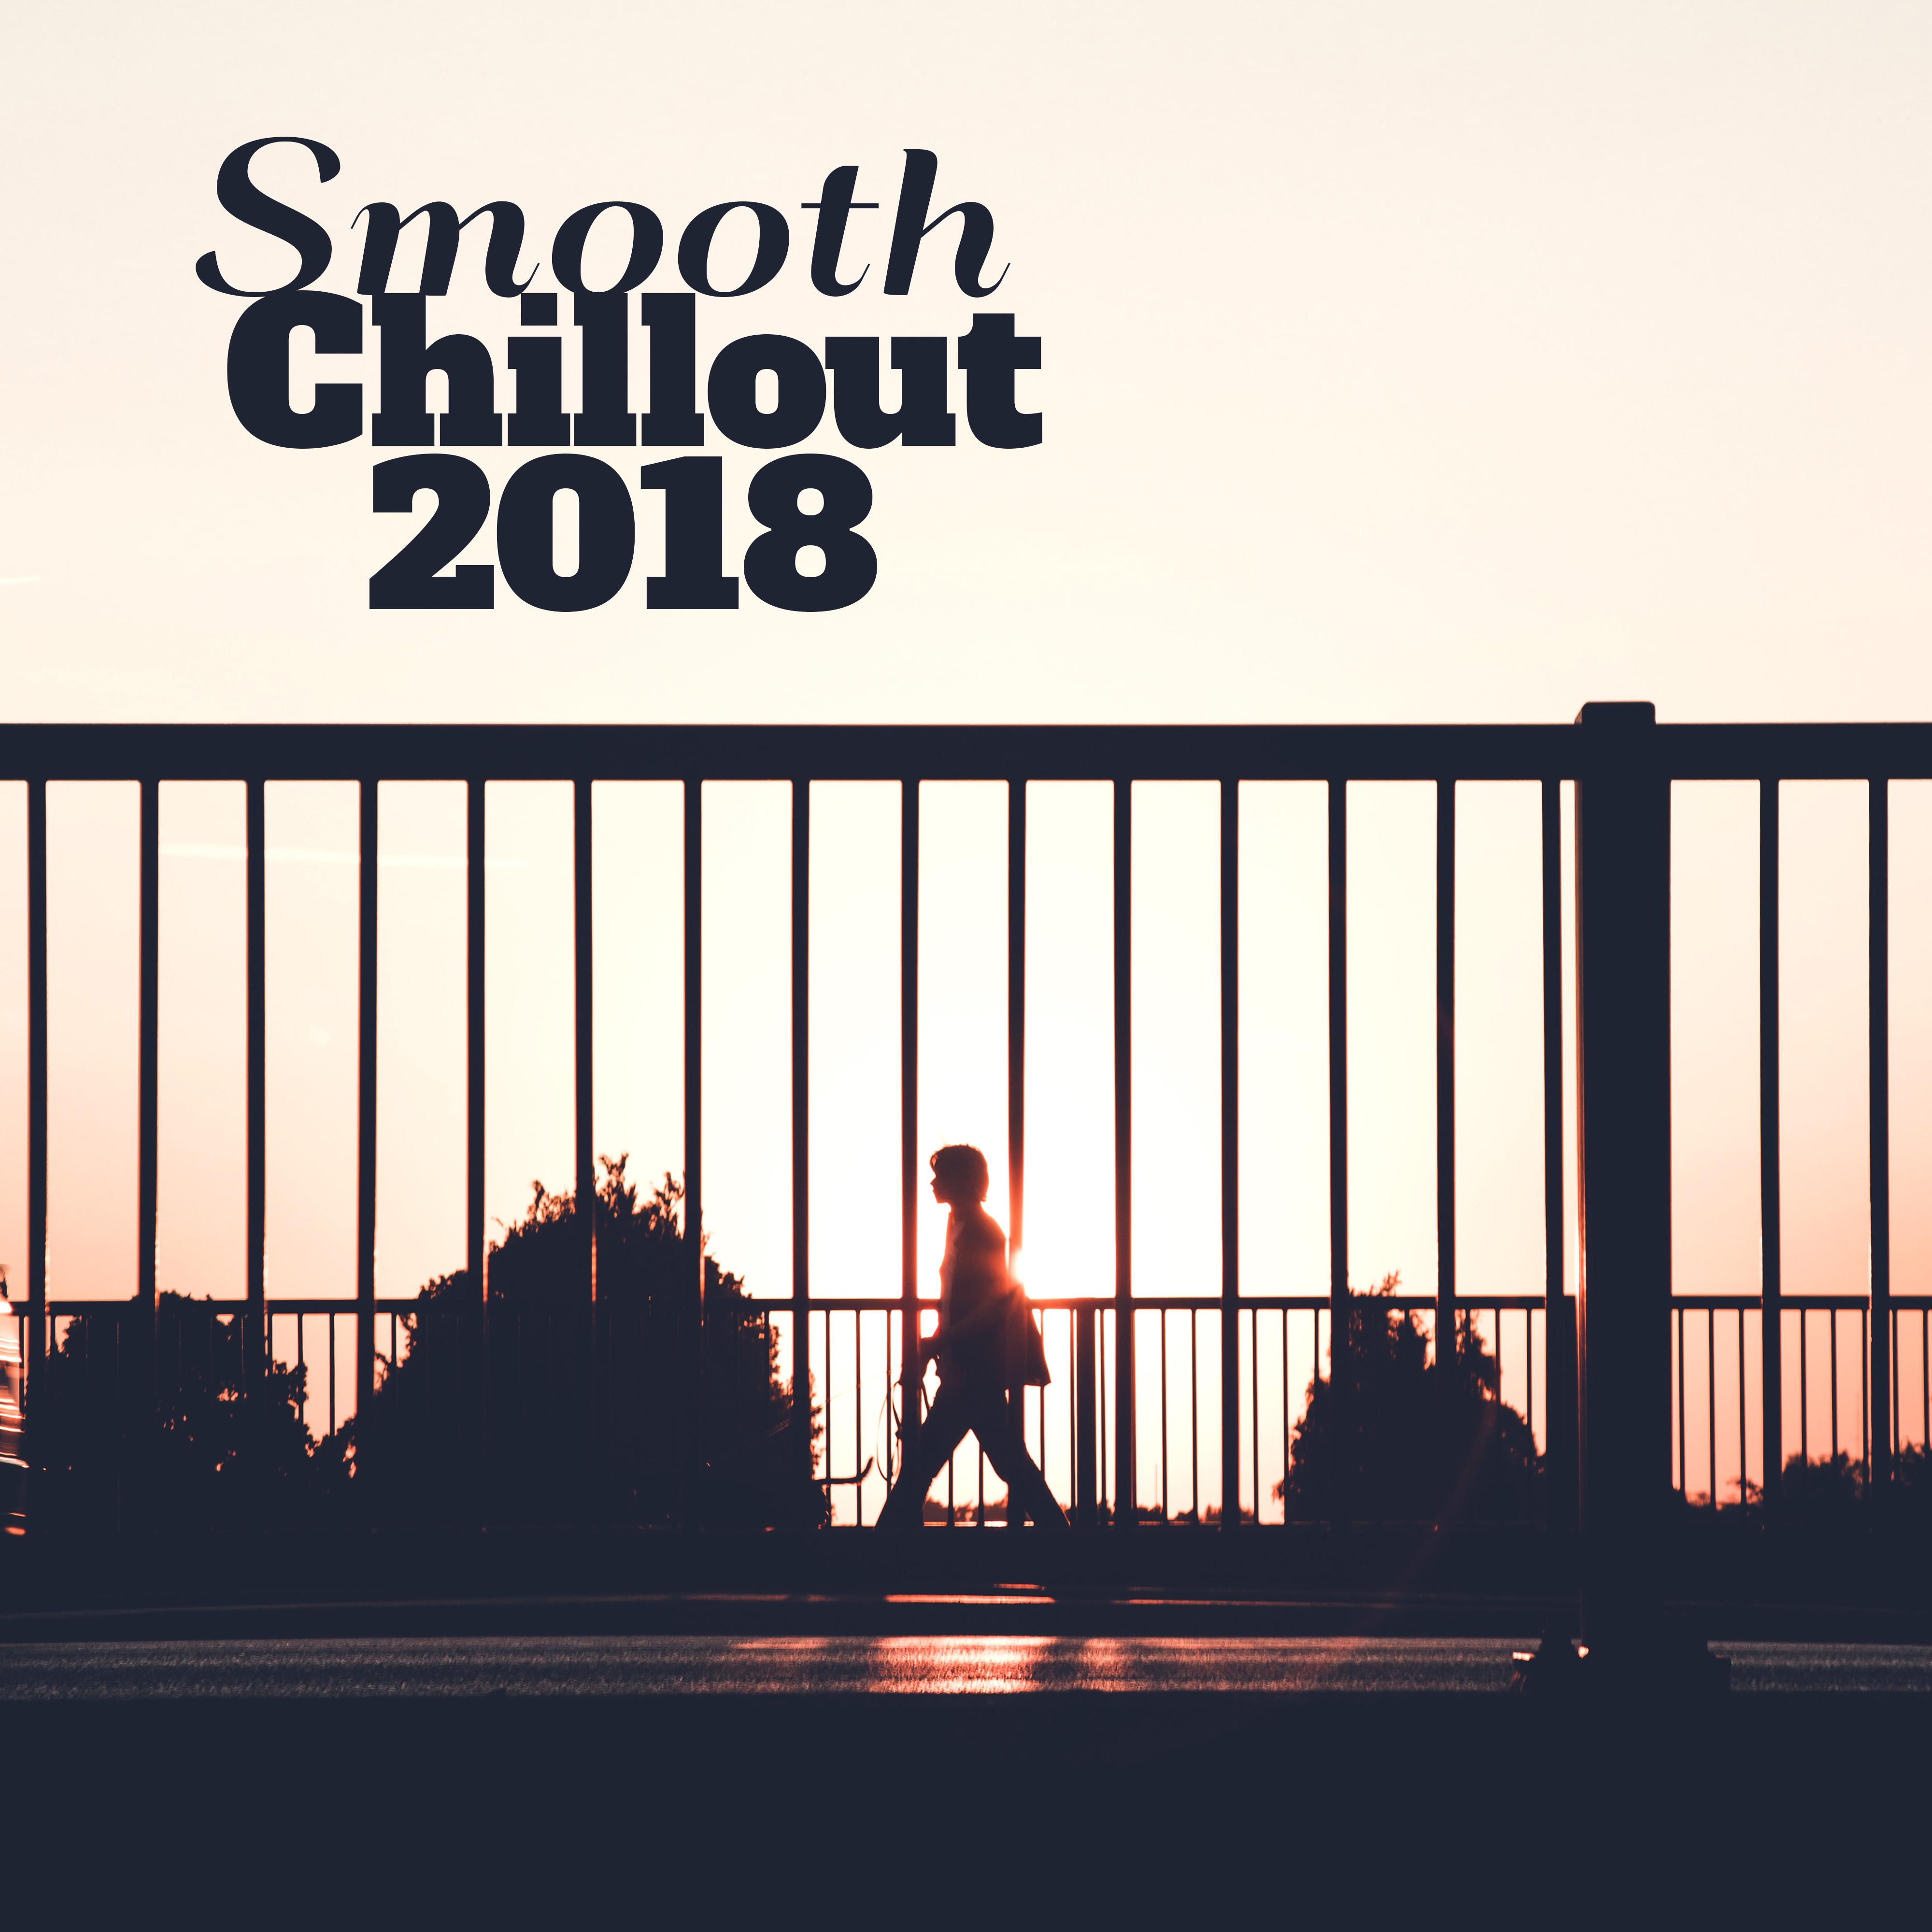 Smooth Chillout 2018